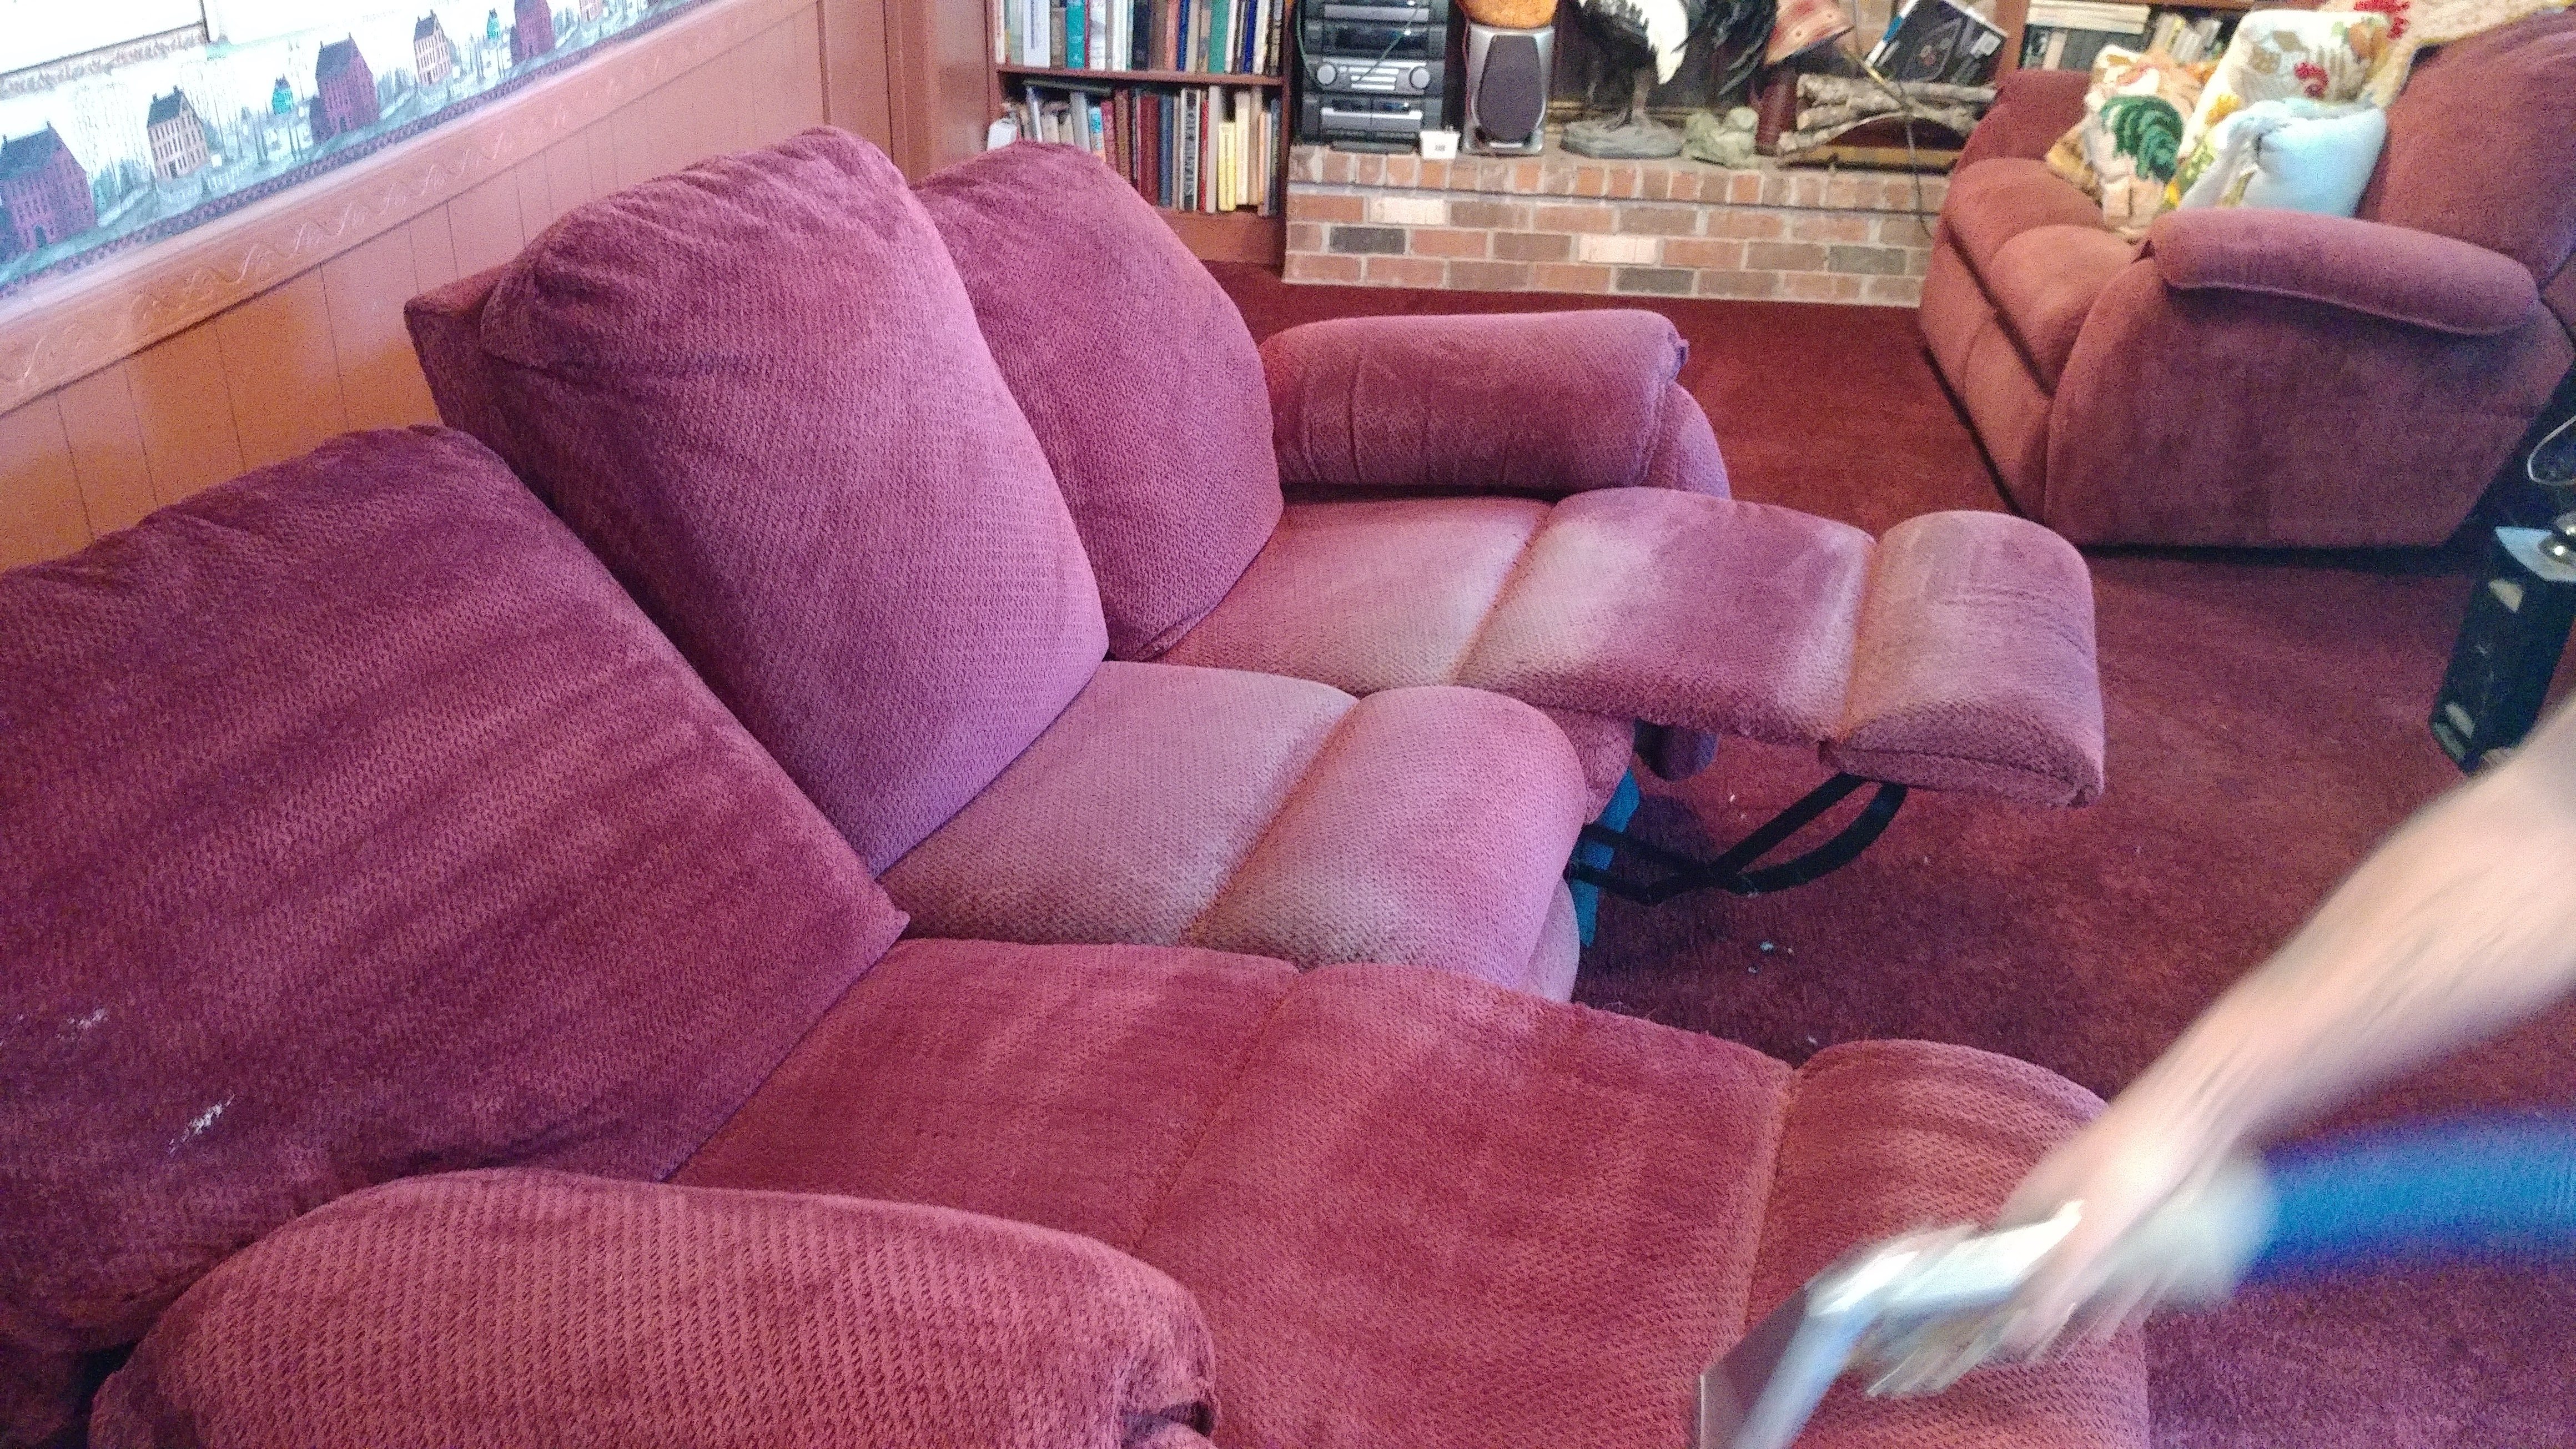 Reclining sofa being cleaned